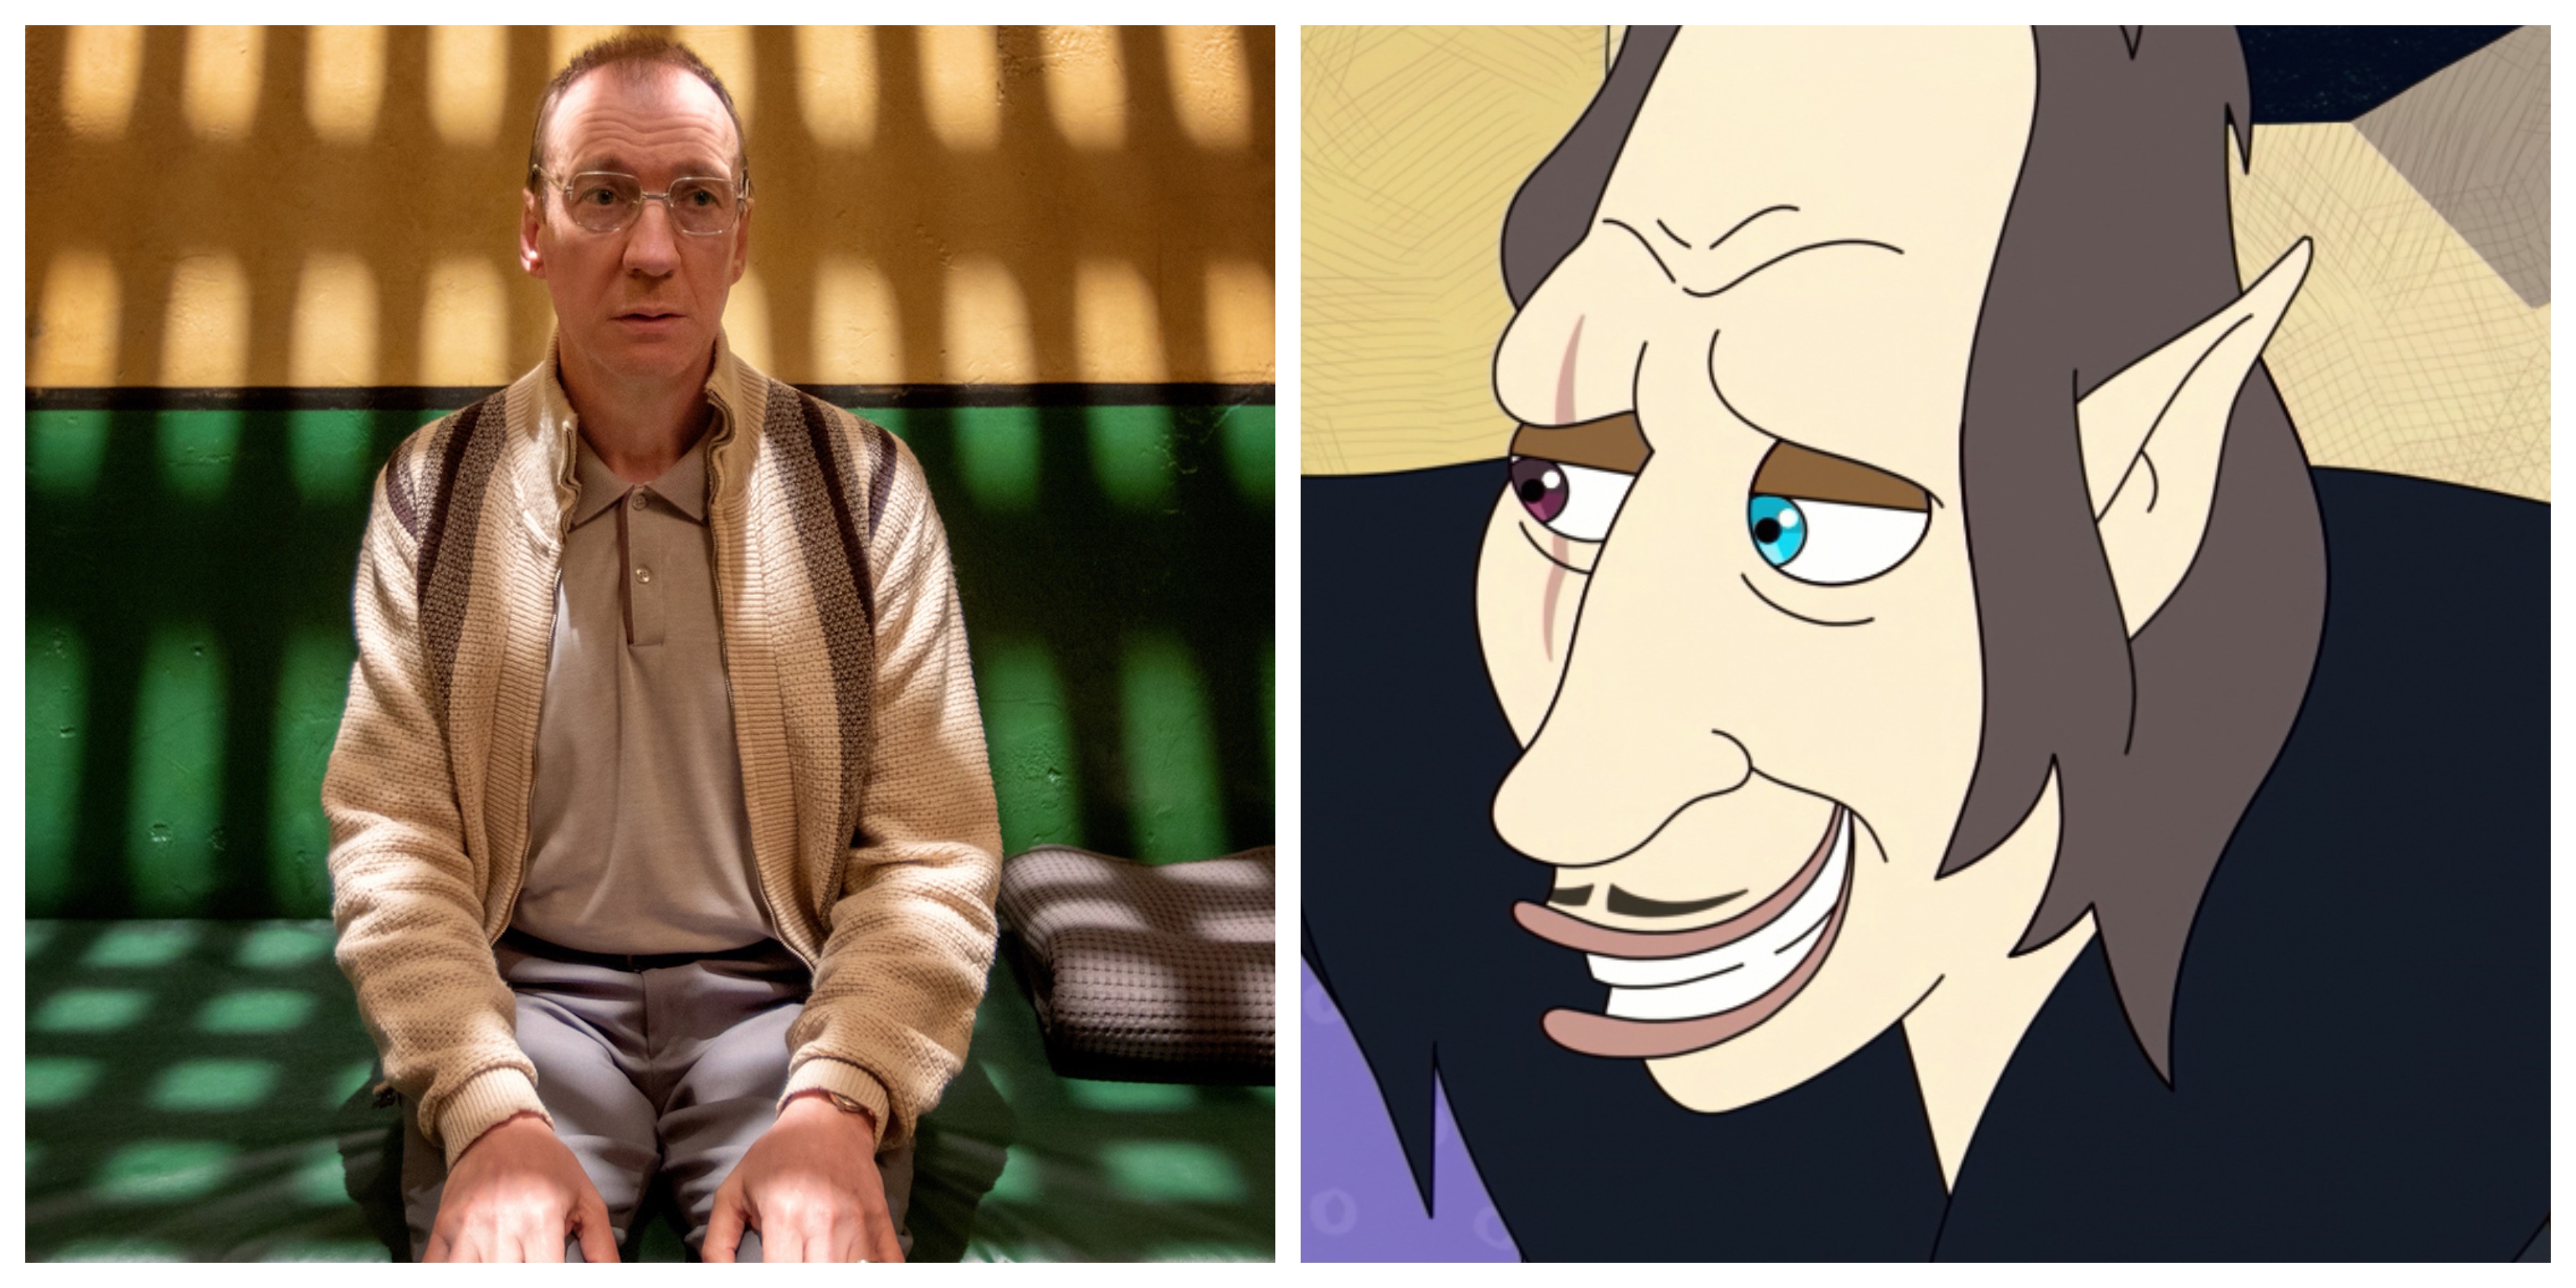 Human Resources Voice Cast - David Thewlis as the Shame Wizard